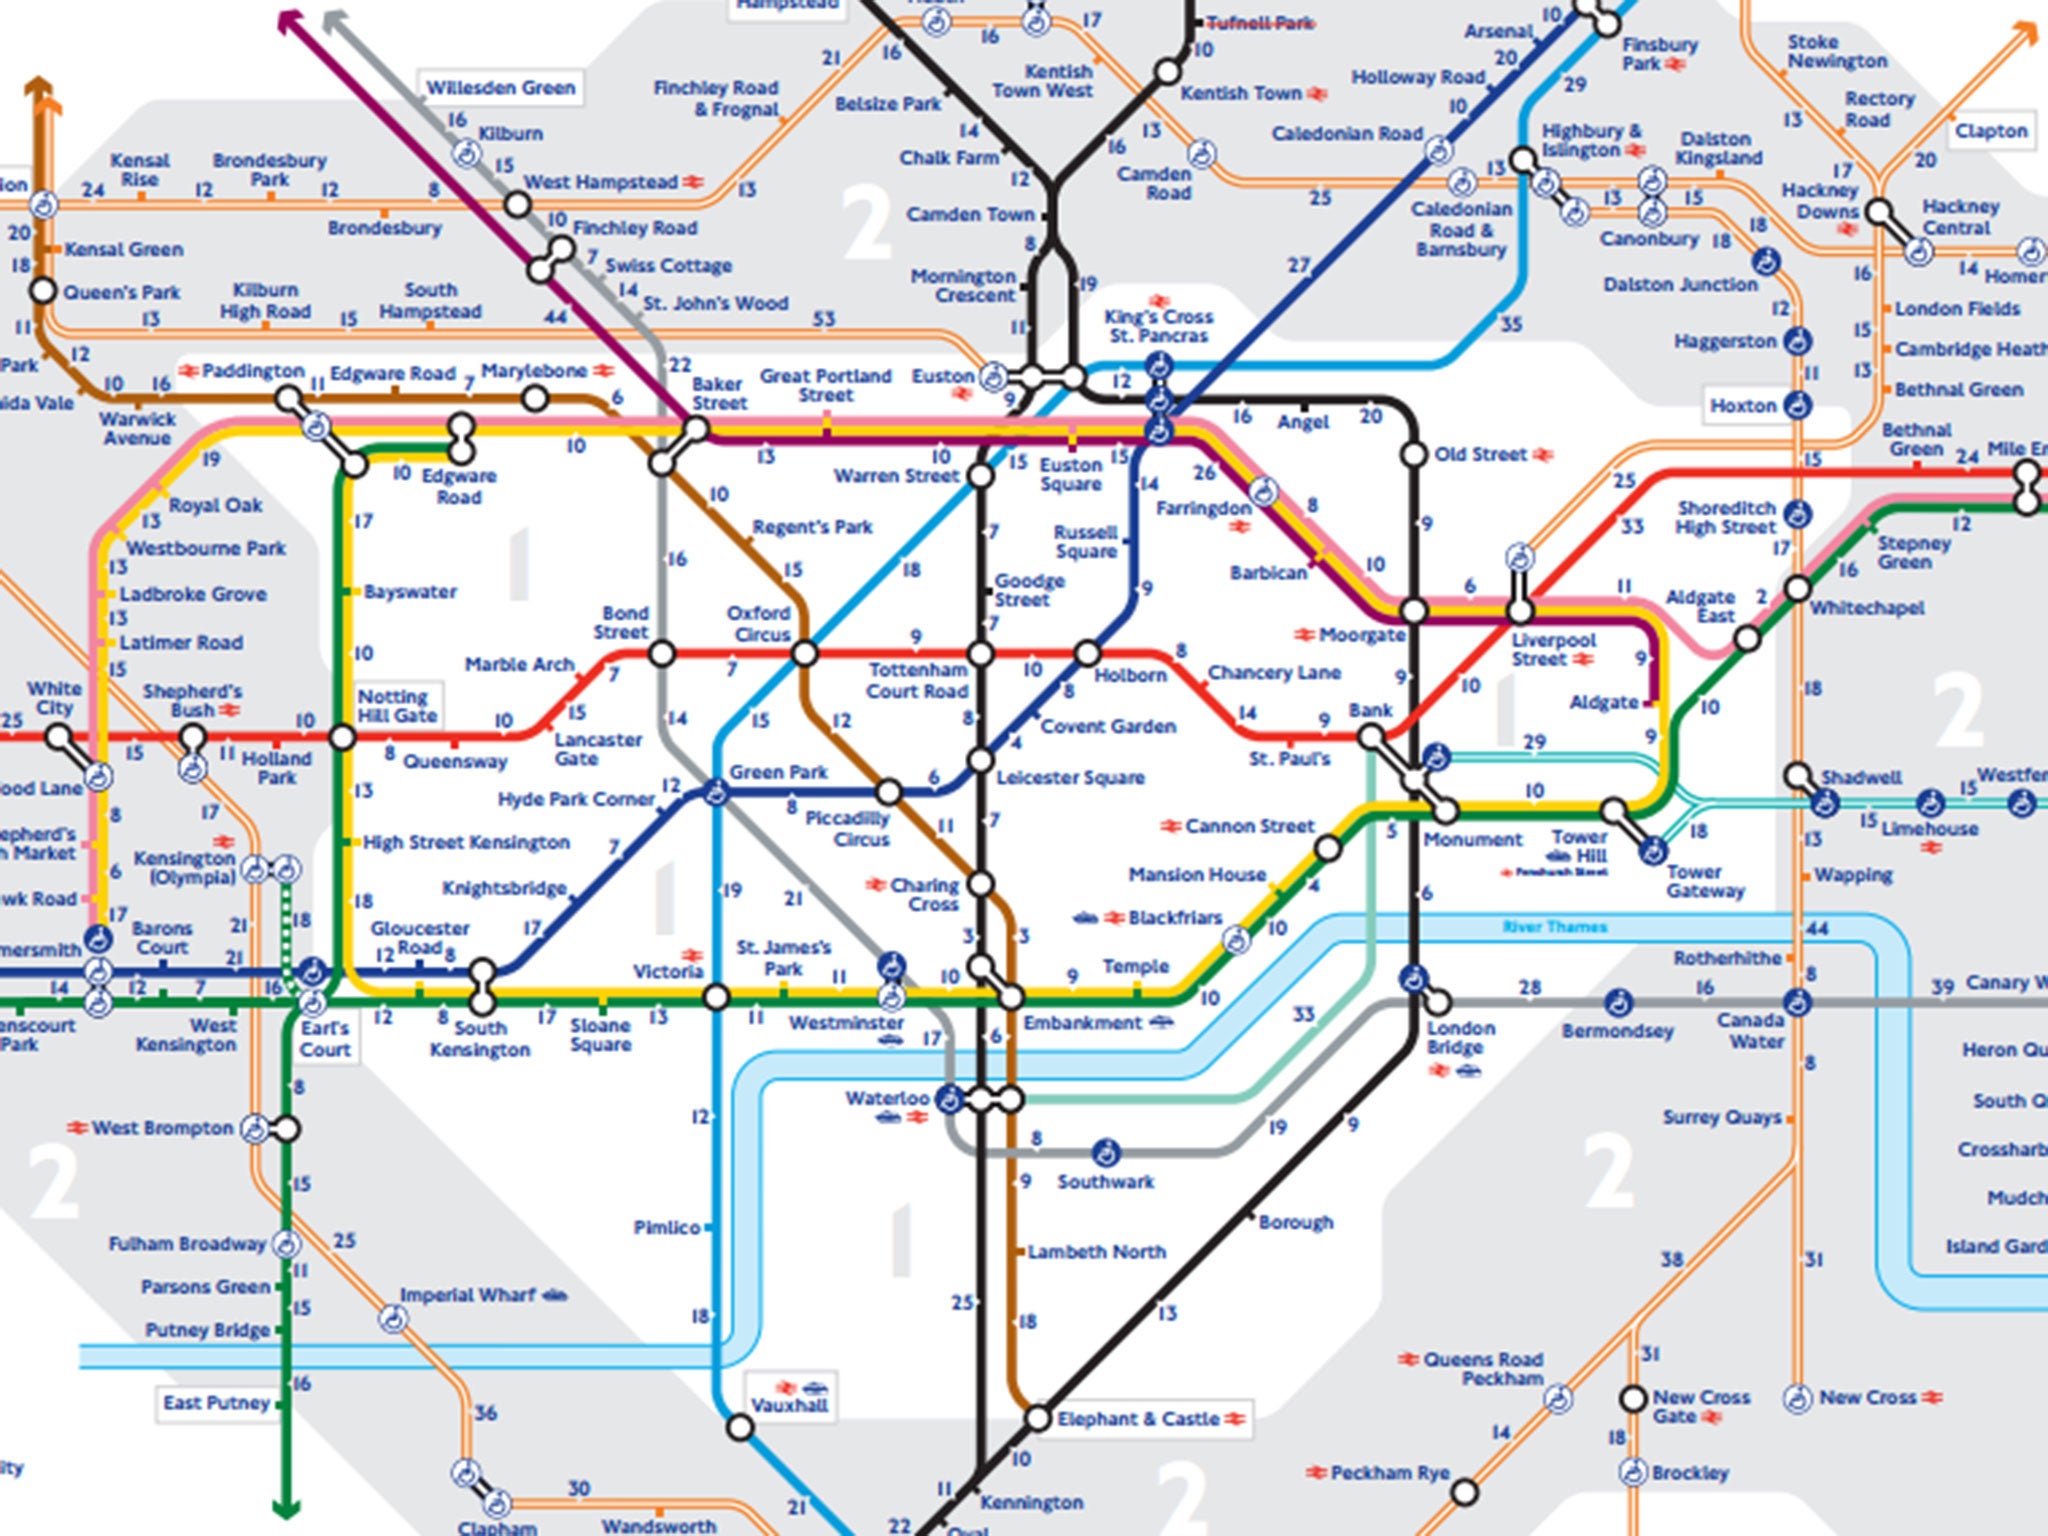 travel by tube today